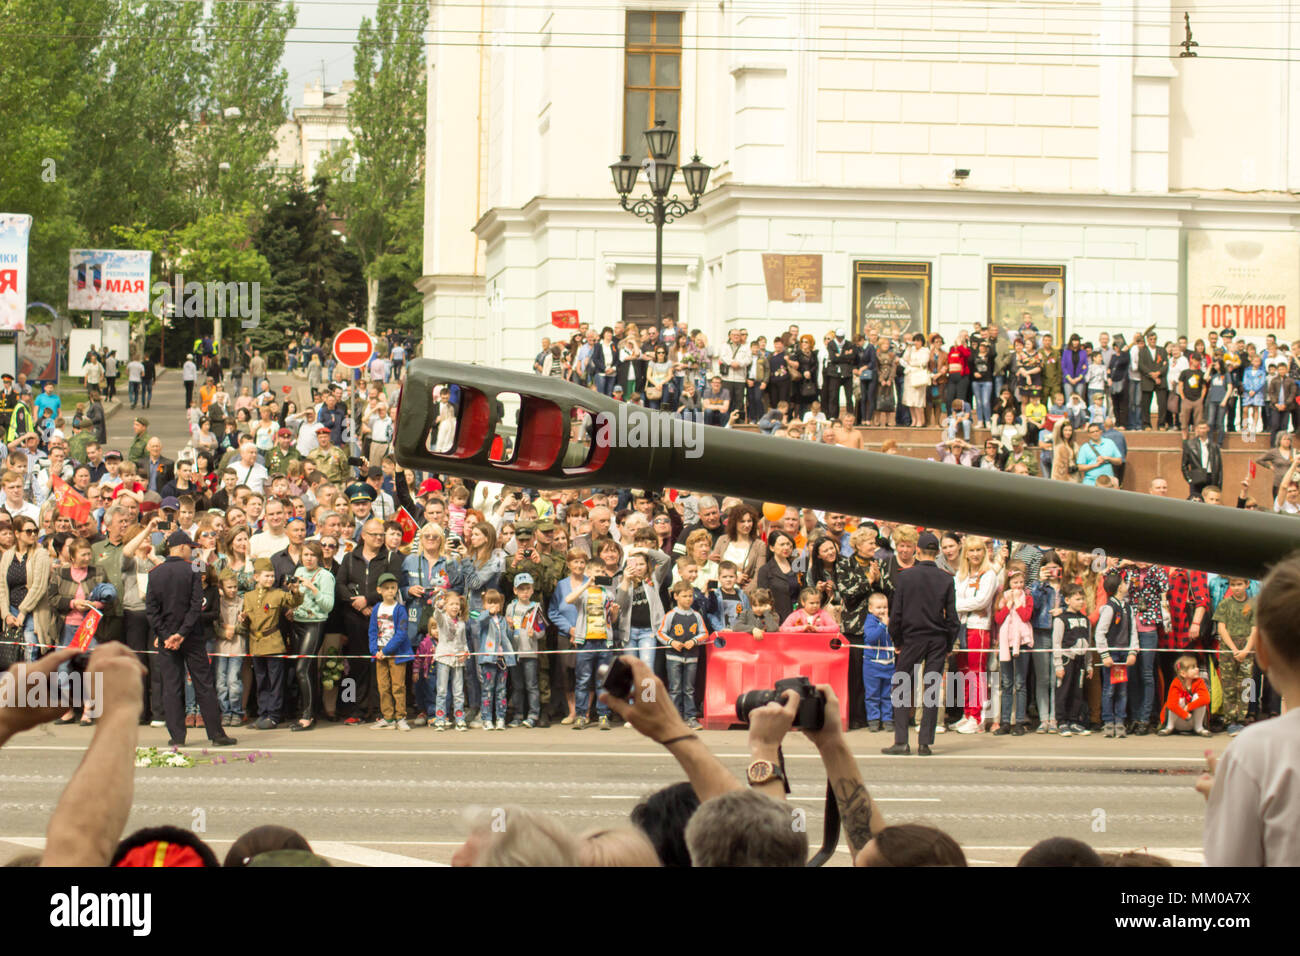 DONETSK, Donetsk People Republic. May 9, 2018: Soviet anti-air gun track with gunners on the main street of the Donetsk city during the Victory Day Parade.DONETSK, Donetsk People Republic. May 9, 2018: Soviet artillery cannons with tracks on the main street of the Donetsk city during the Victory Day Parade. Credit: An147/Alamy Live News Stock Photo